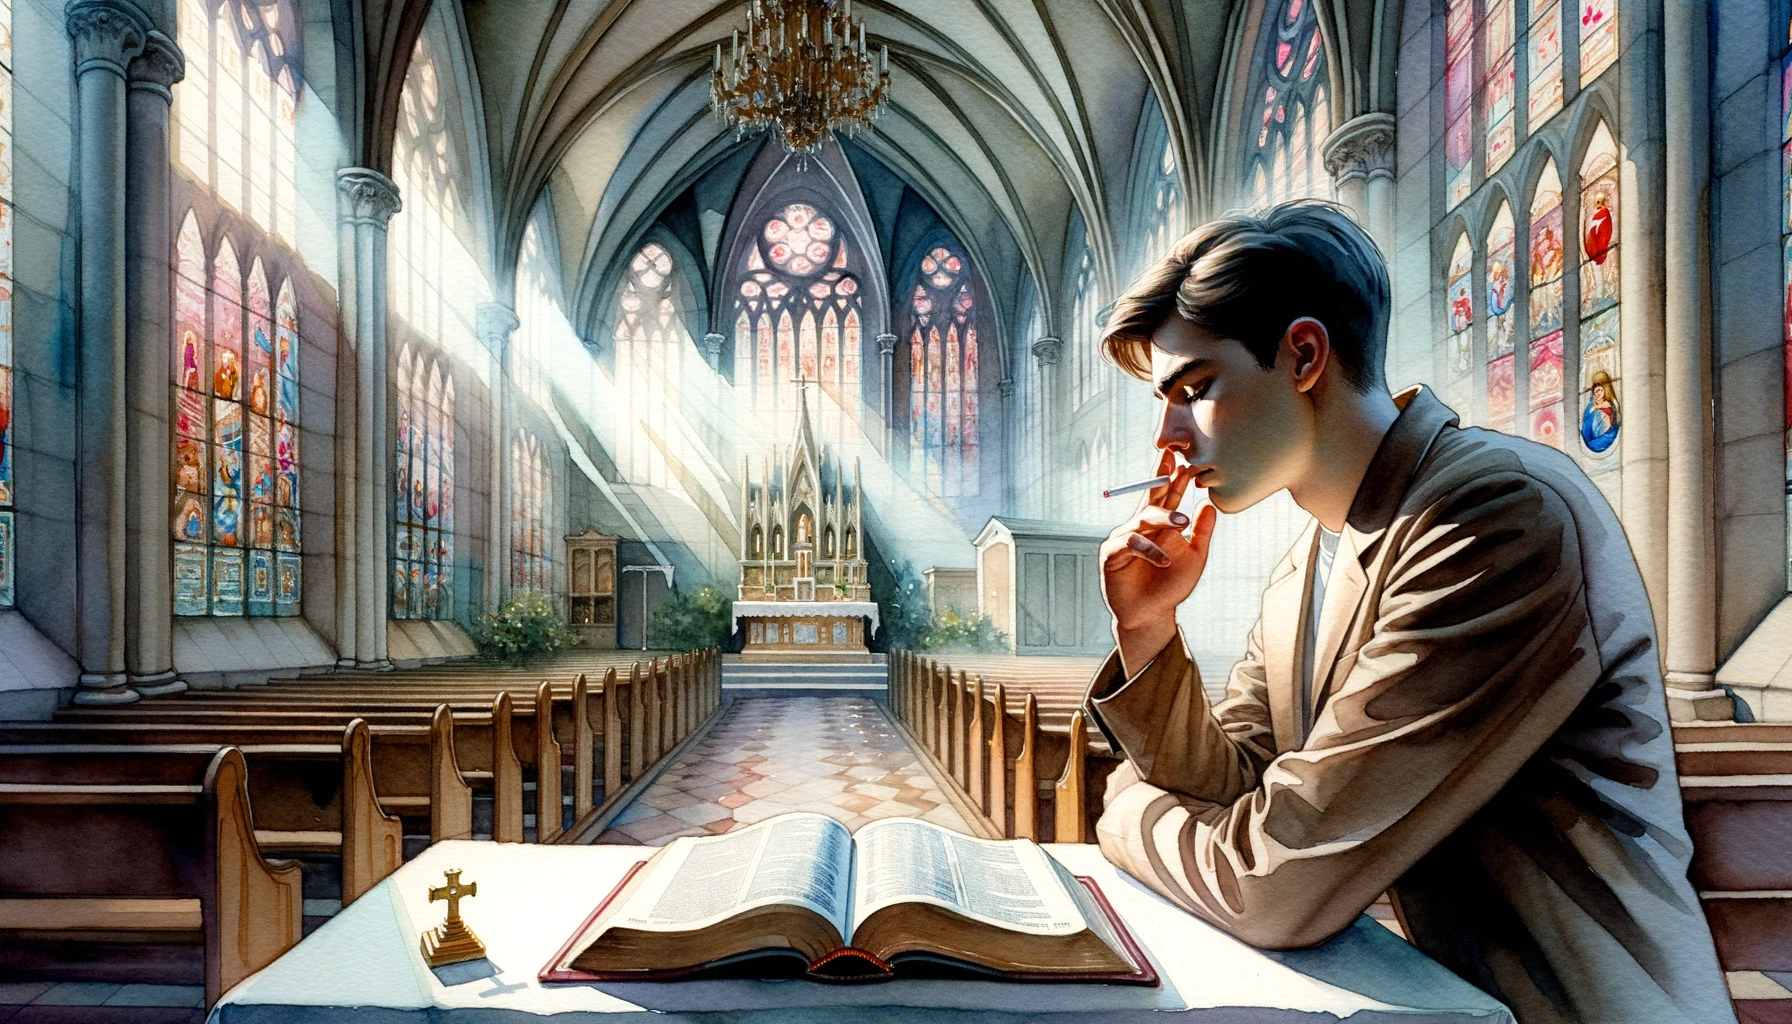 Young Christian man holding a cigarette in a temple, contemplates it, juxtaposing the act of smoking with the sacred setting.